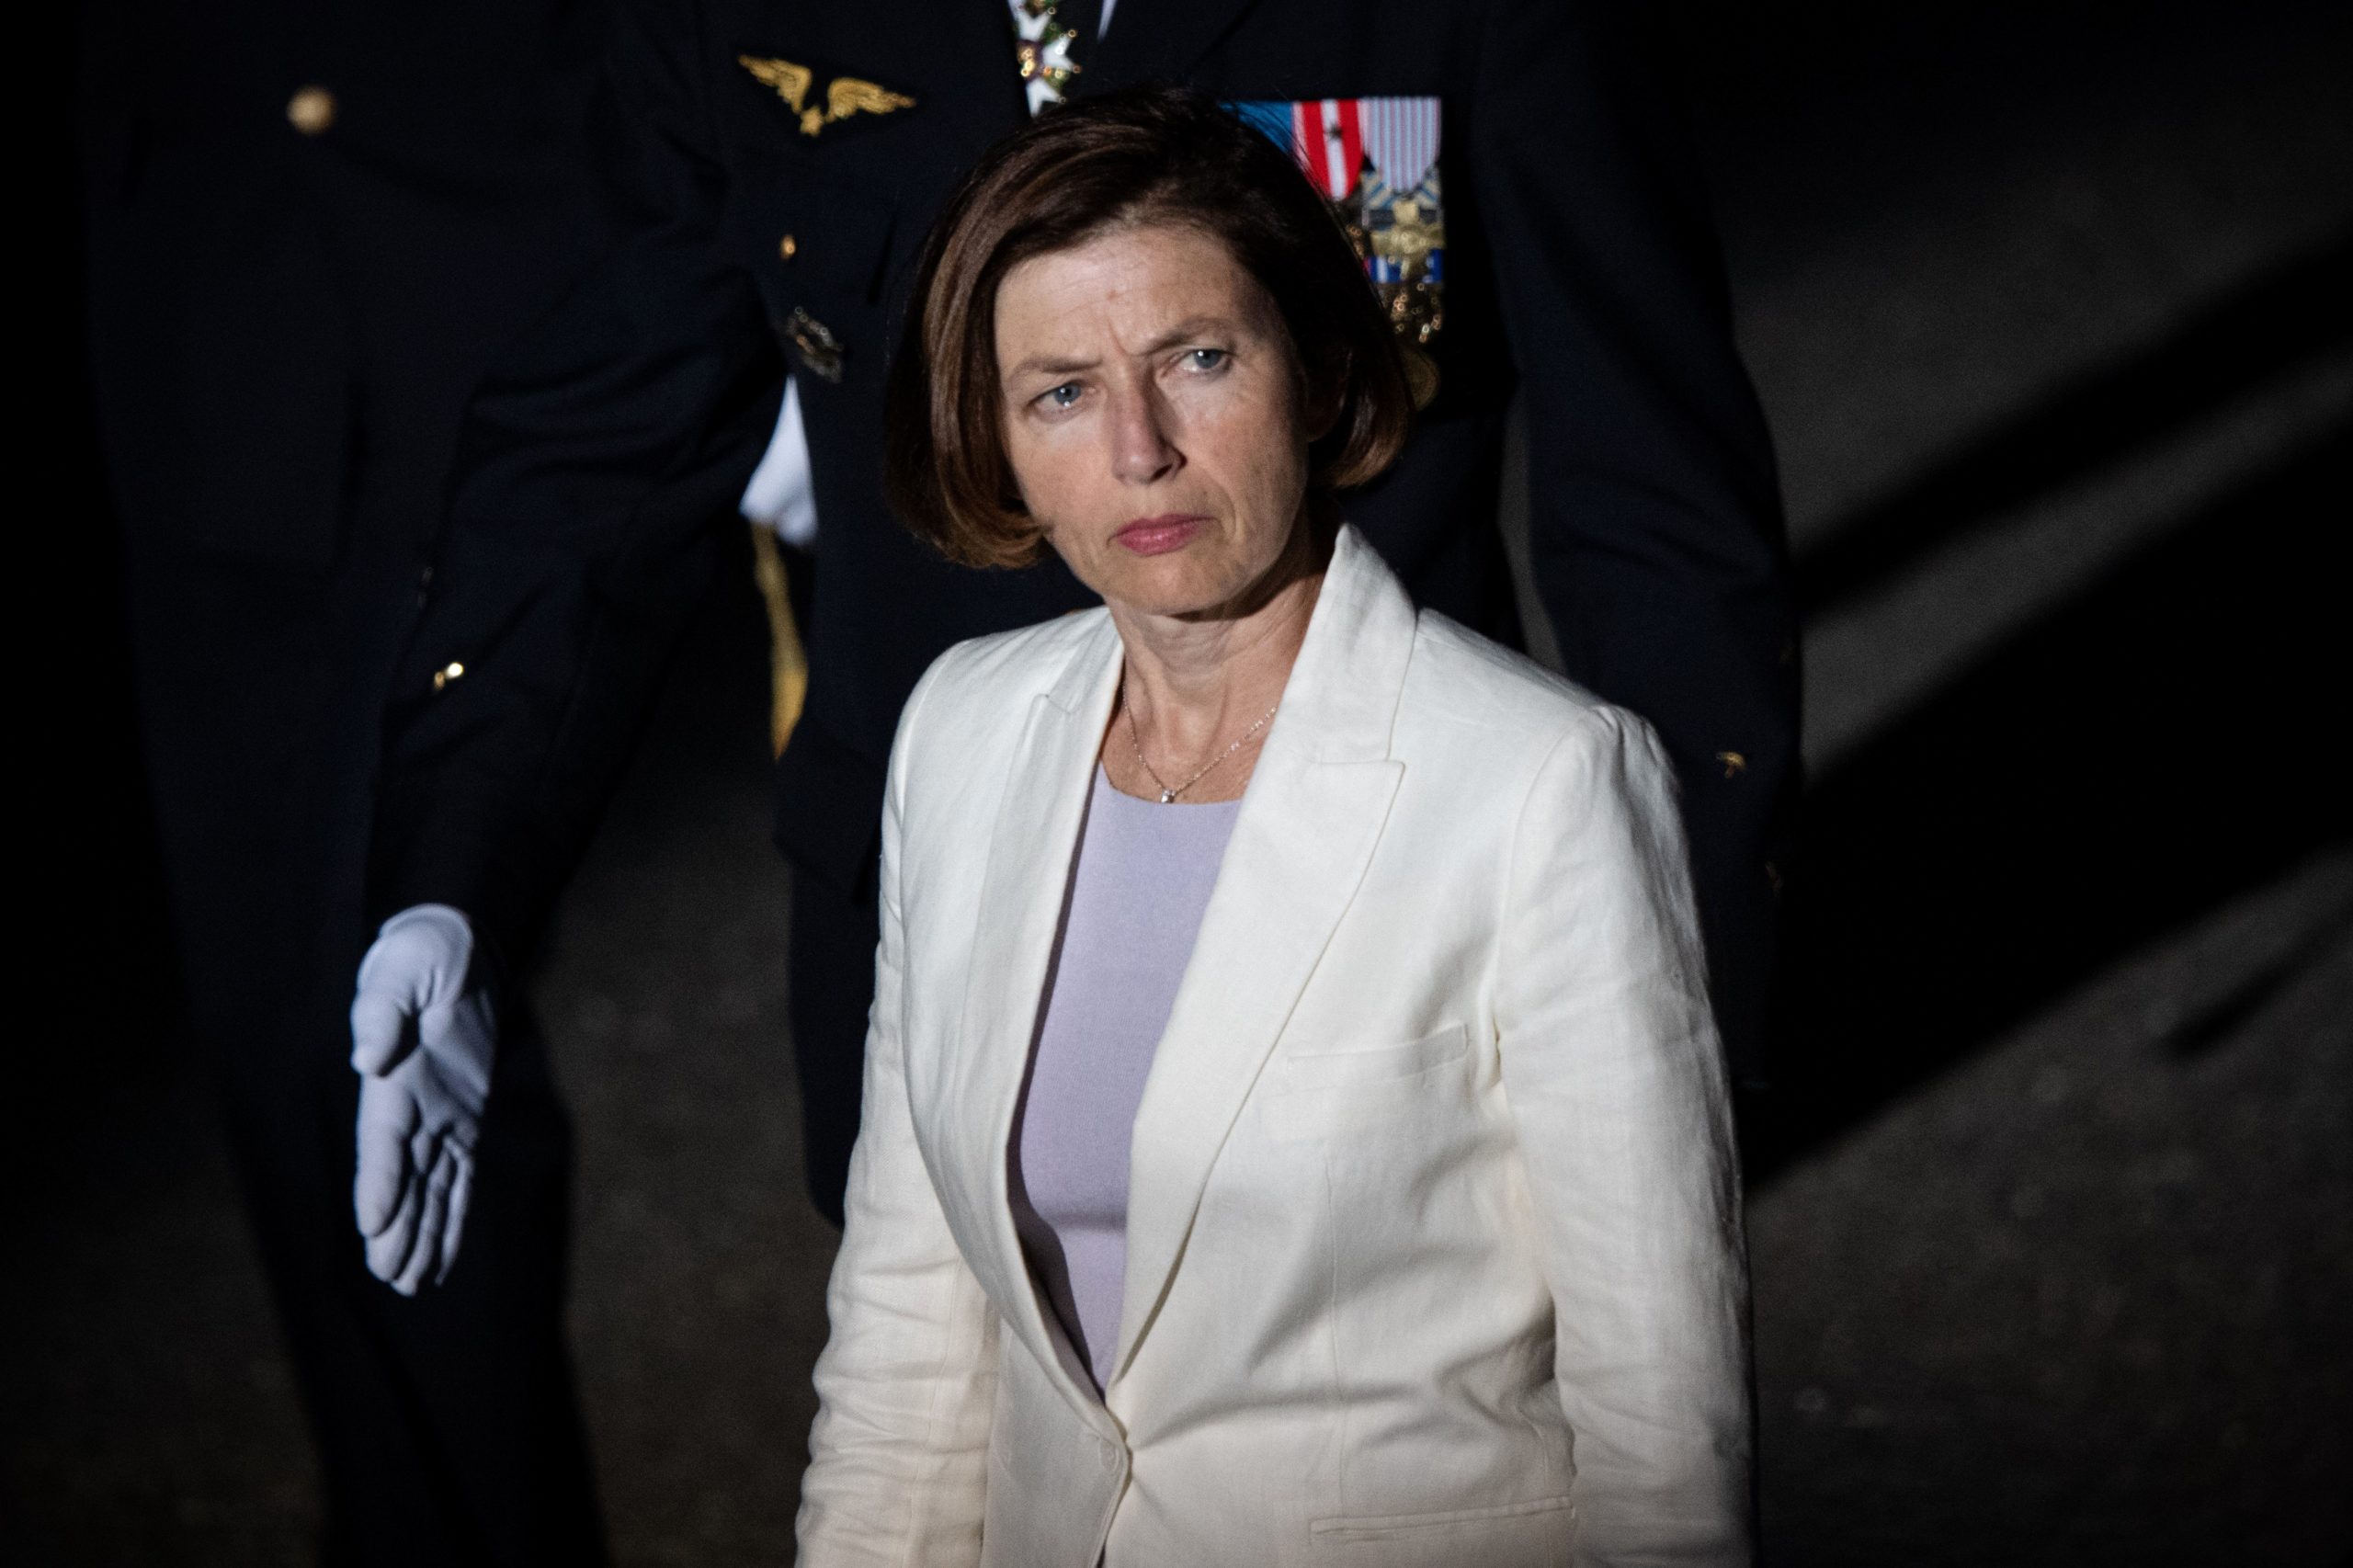 French Defence Minister Florence Parly walks on the Salon-de-Provence air base yard on July 24, 2020 during the baptism ceremony of the 2019 Air School officer cadets. (Photo by CLEMENT MAHOUDEAU/AFP via Getty Images)